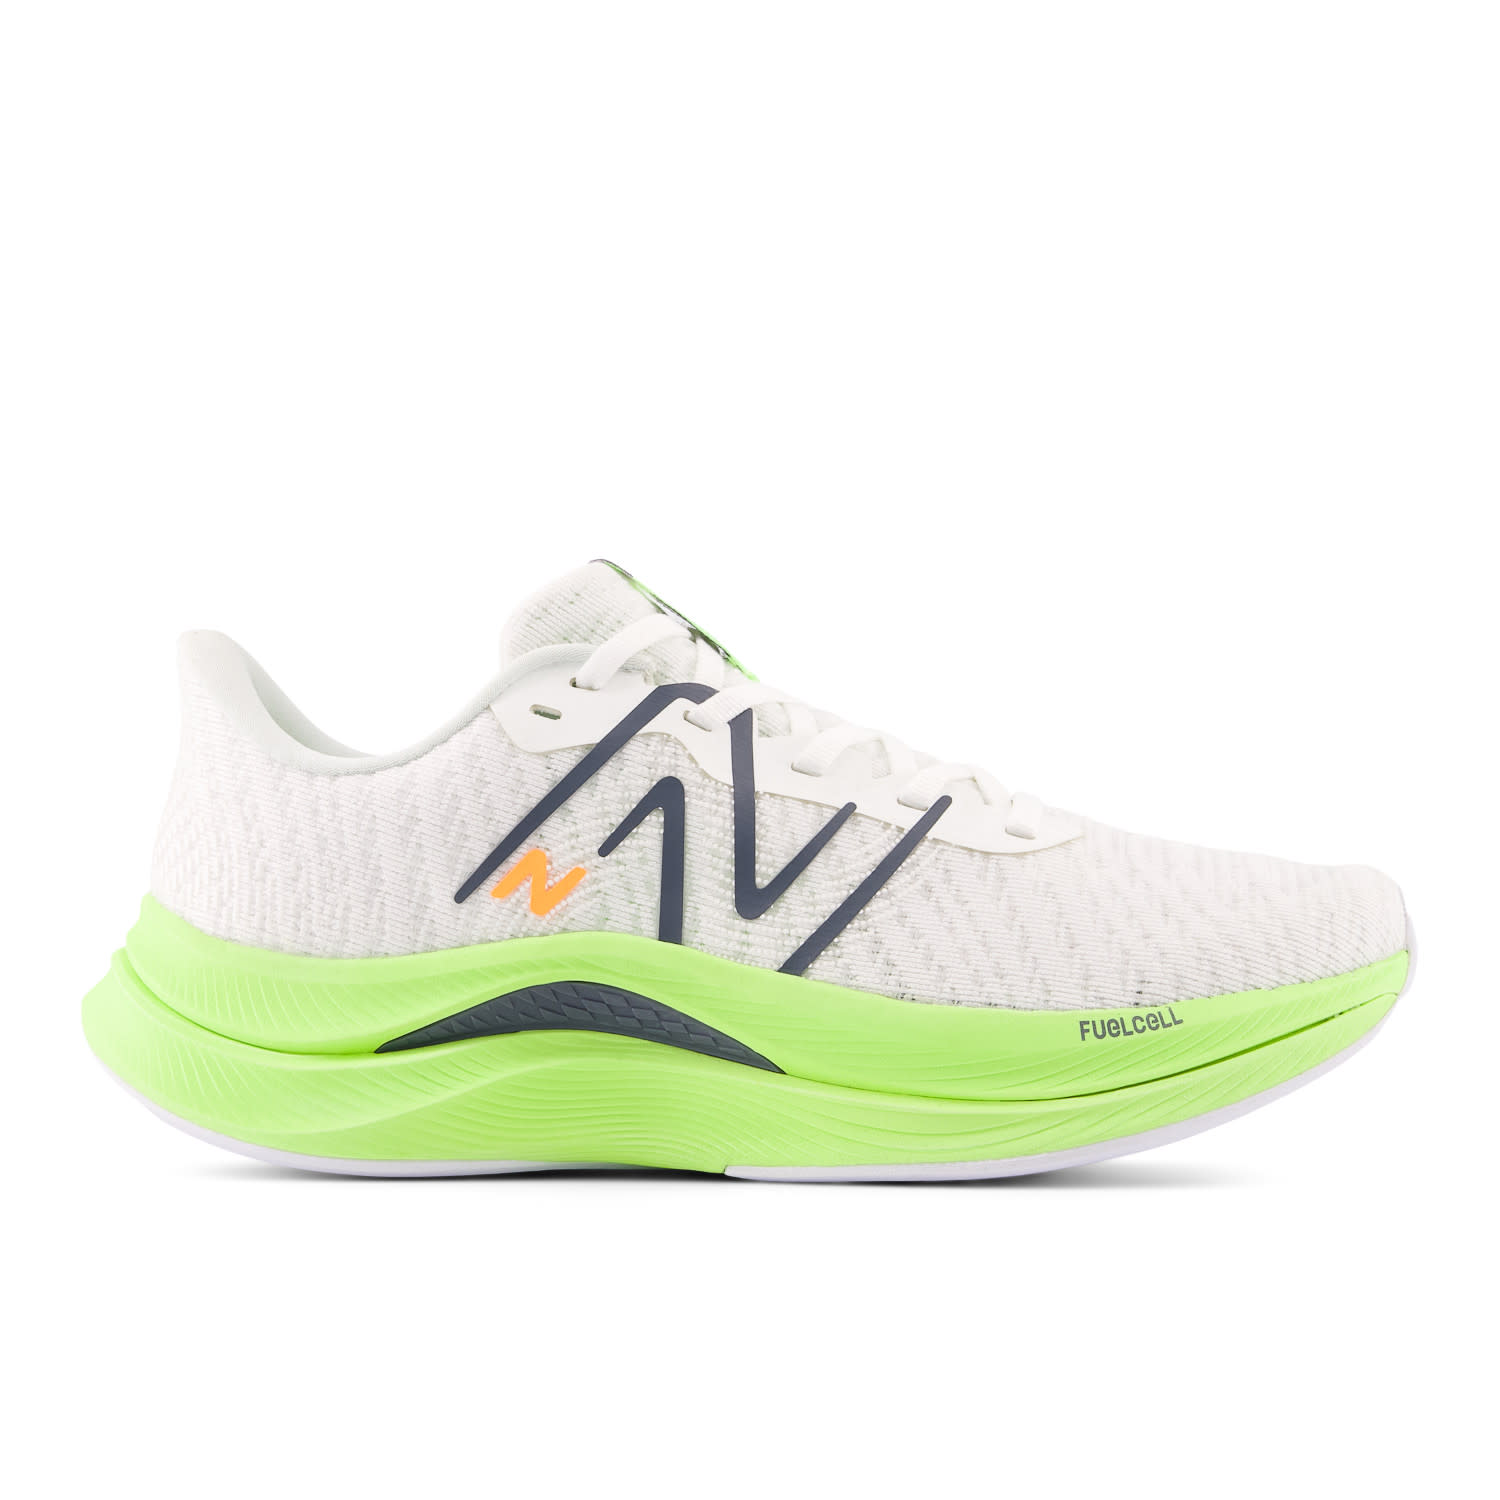 New Balance Women’s Fuelcell Propel V4 White